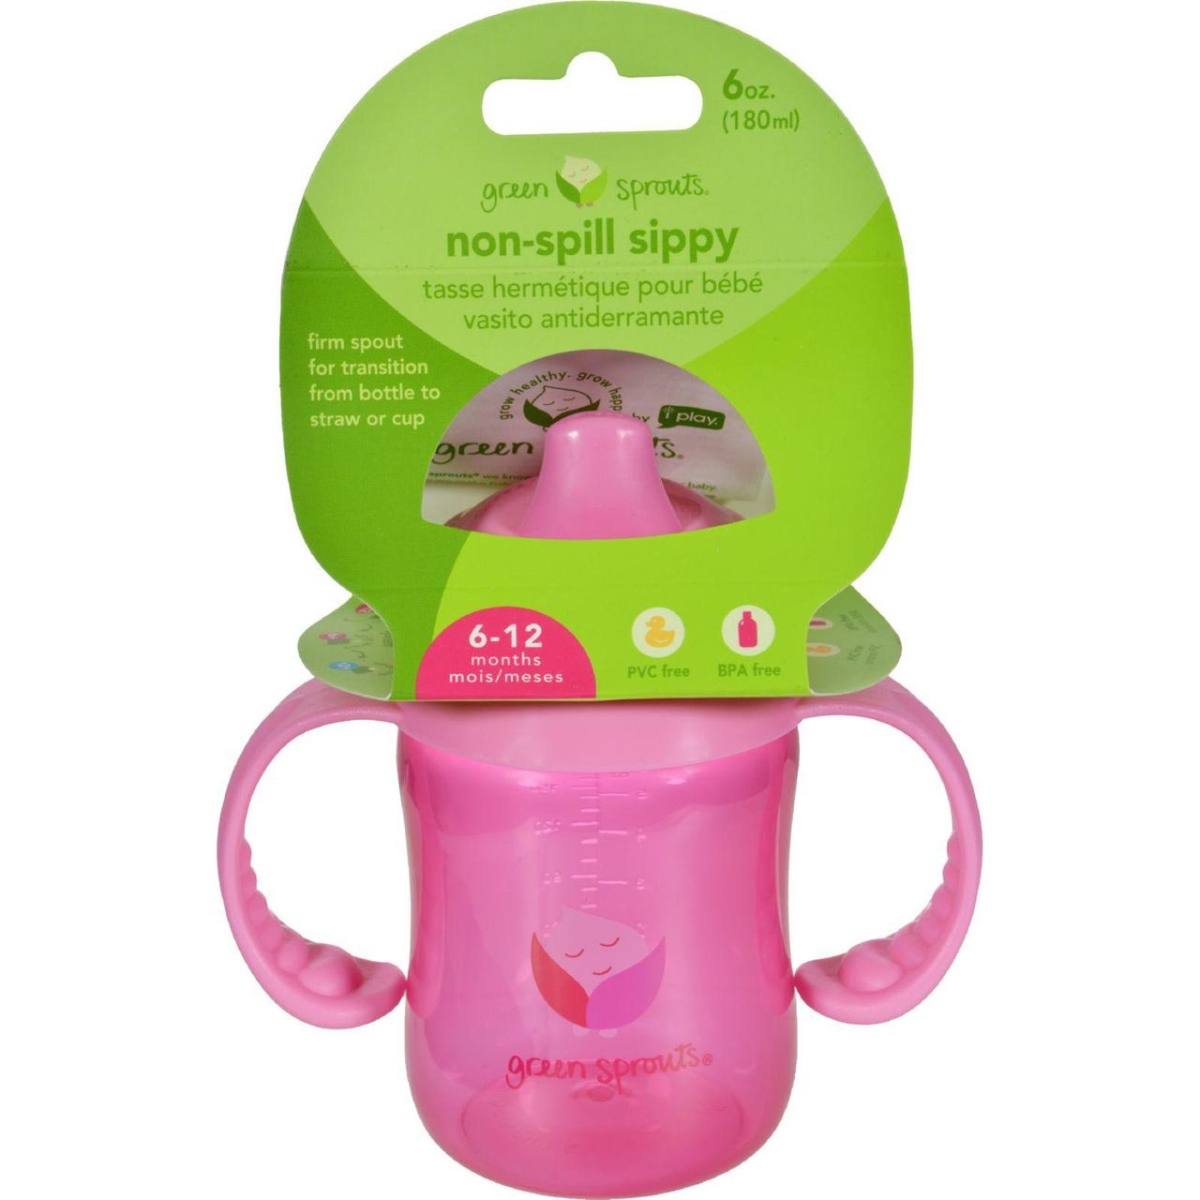 Hg1528900 6 Oz Non Spill Sippy Cup - Pink